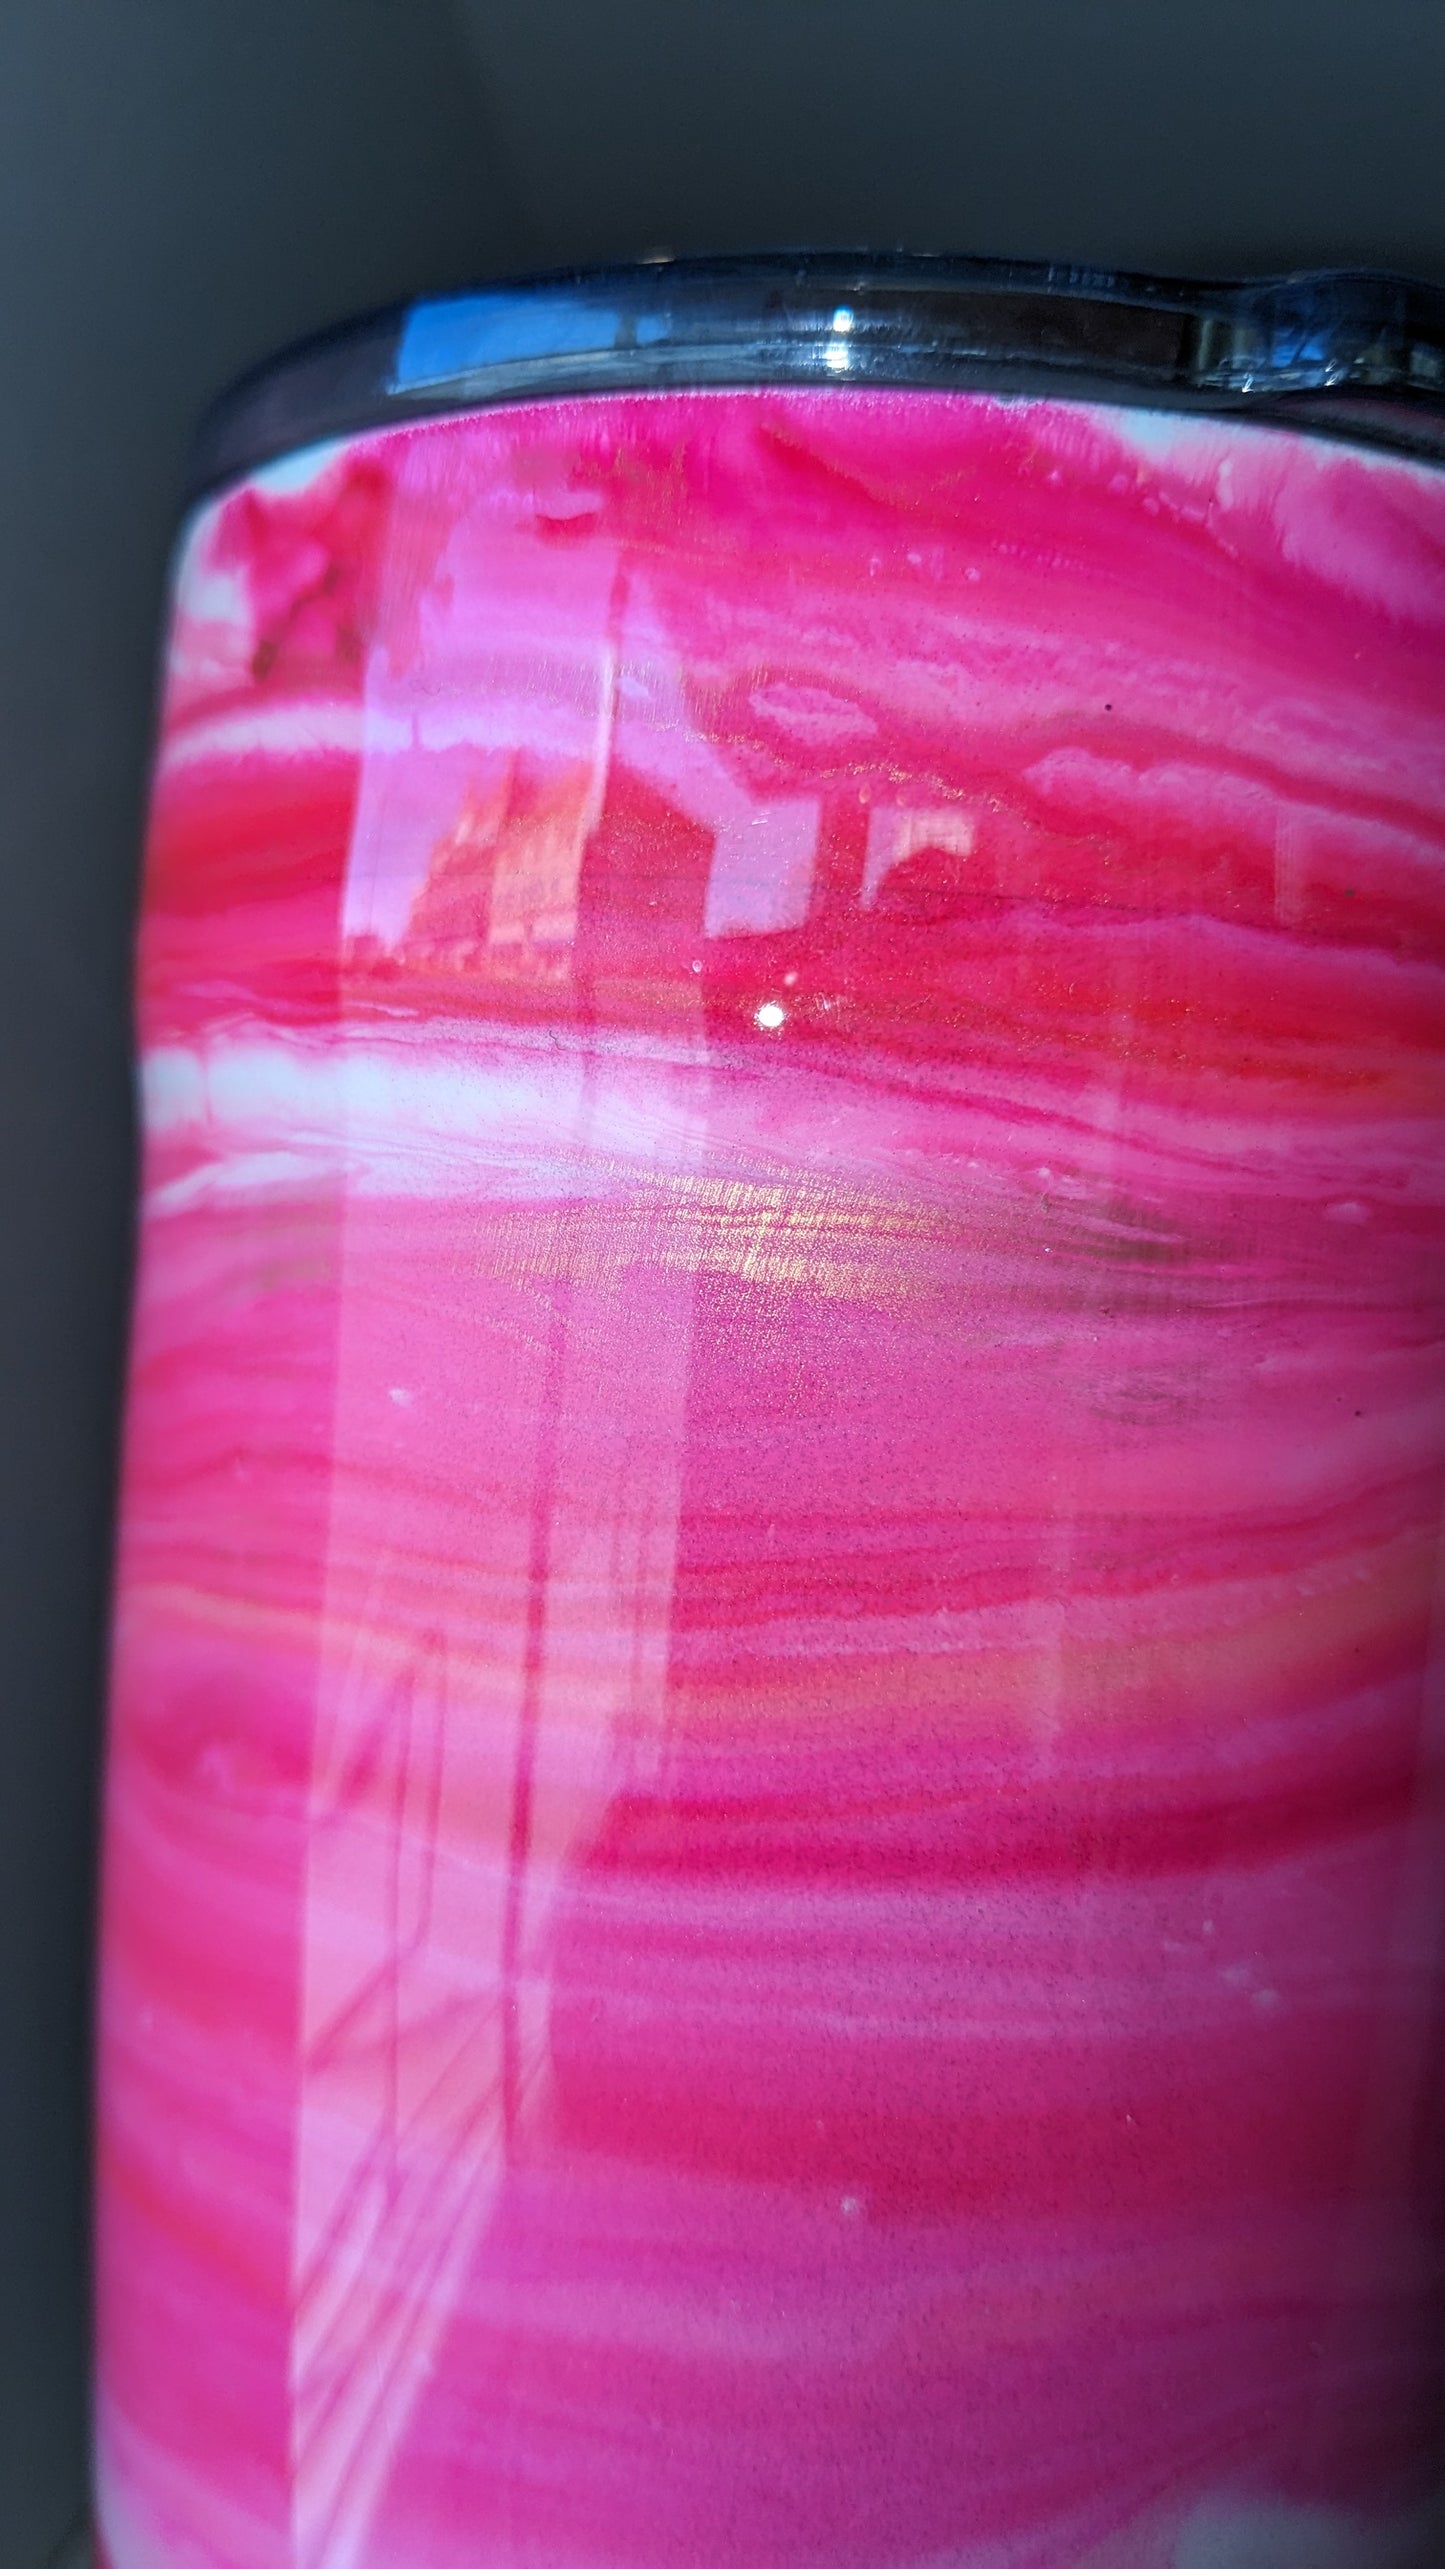 15 Oz Stainless Steel Insulated Tumbler. Alcohol Ink Pinks